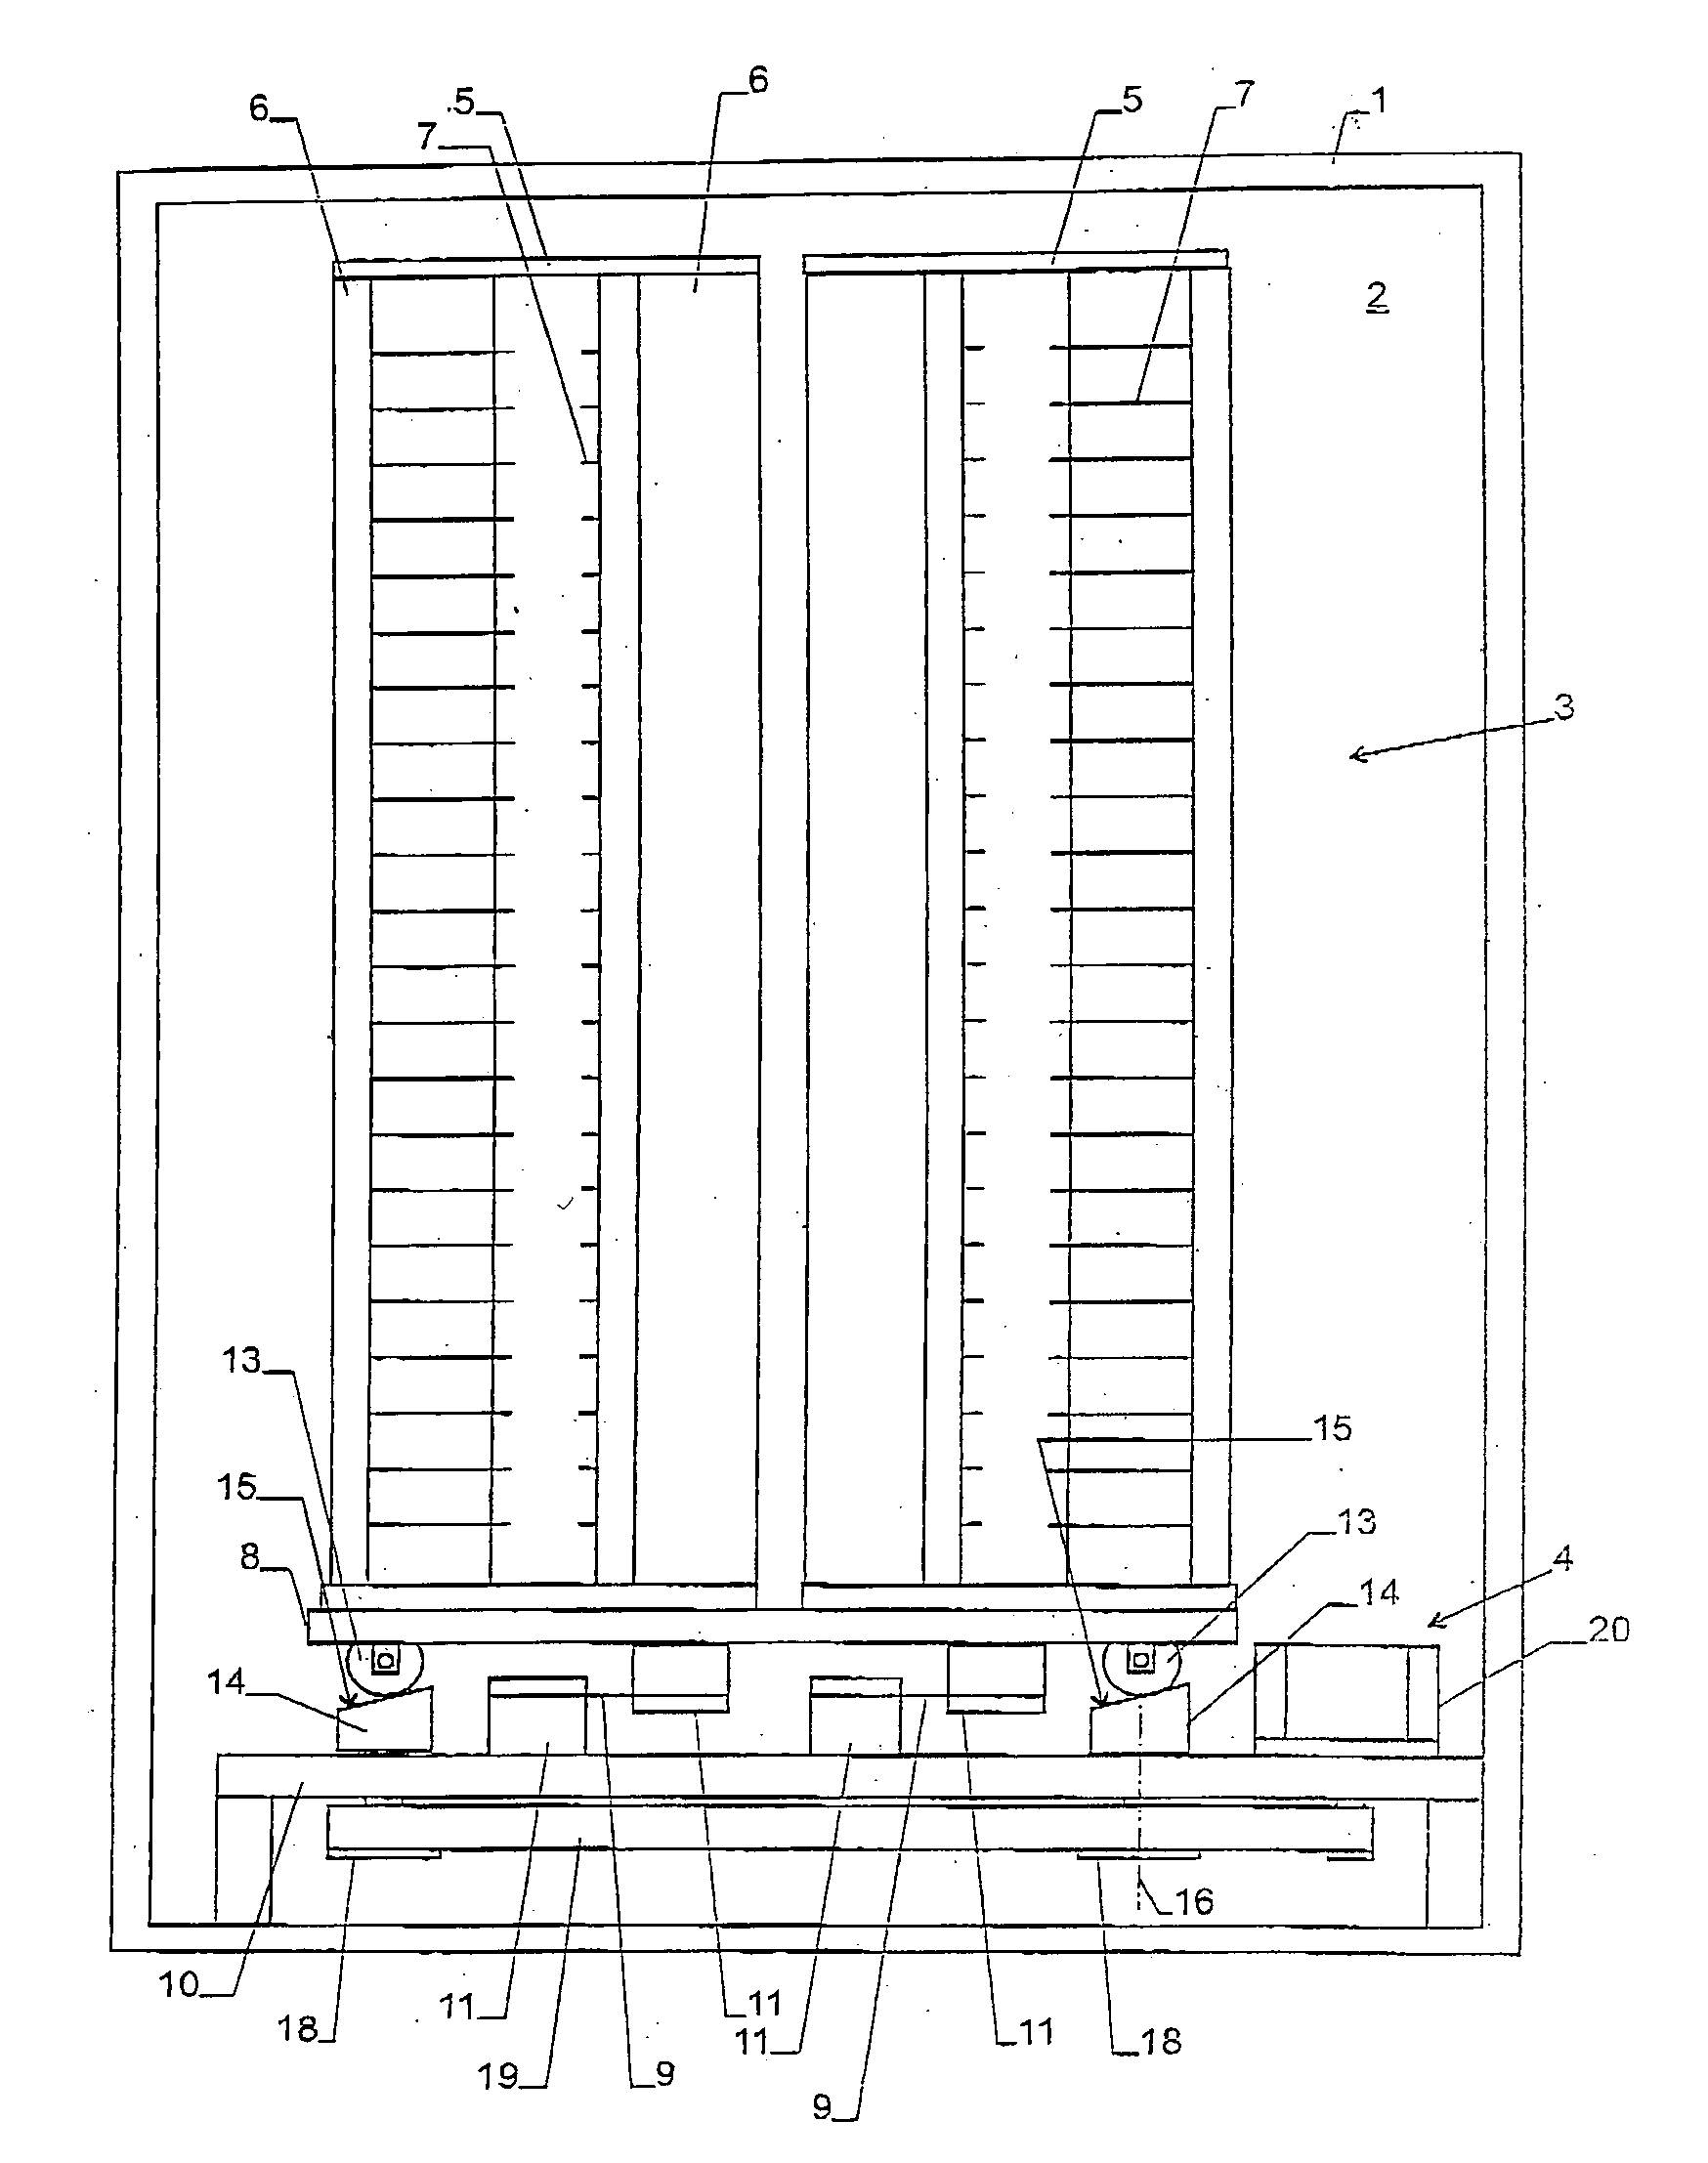 Storage device for laboratory samples having storage racks and a shaker